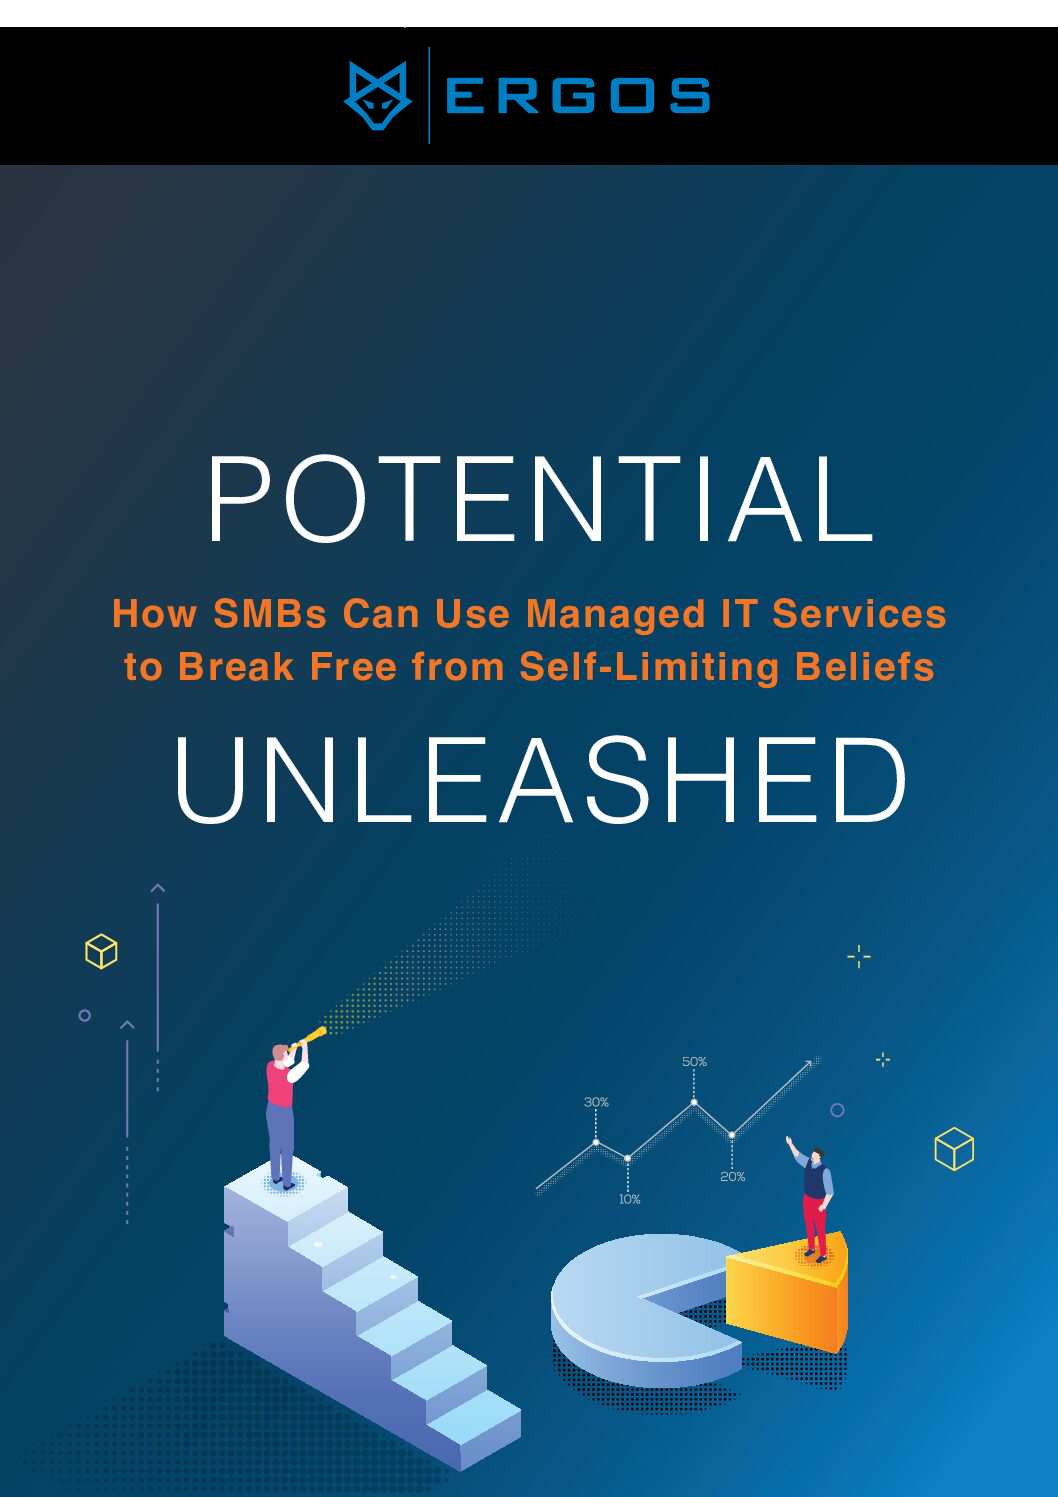 Book cover for "Potential Unleashed: How SMBs Can Use Managed IT Services to Break Free from Self-Limiting Beliefs"